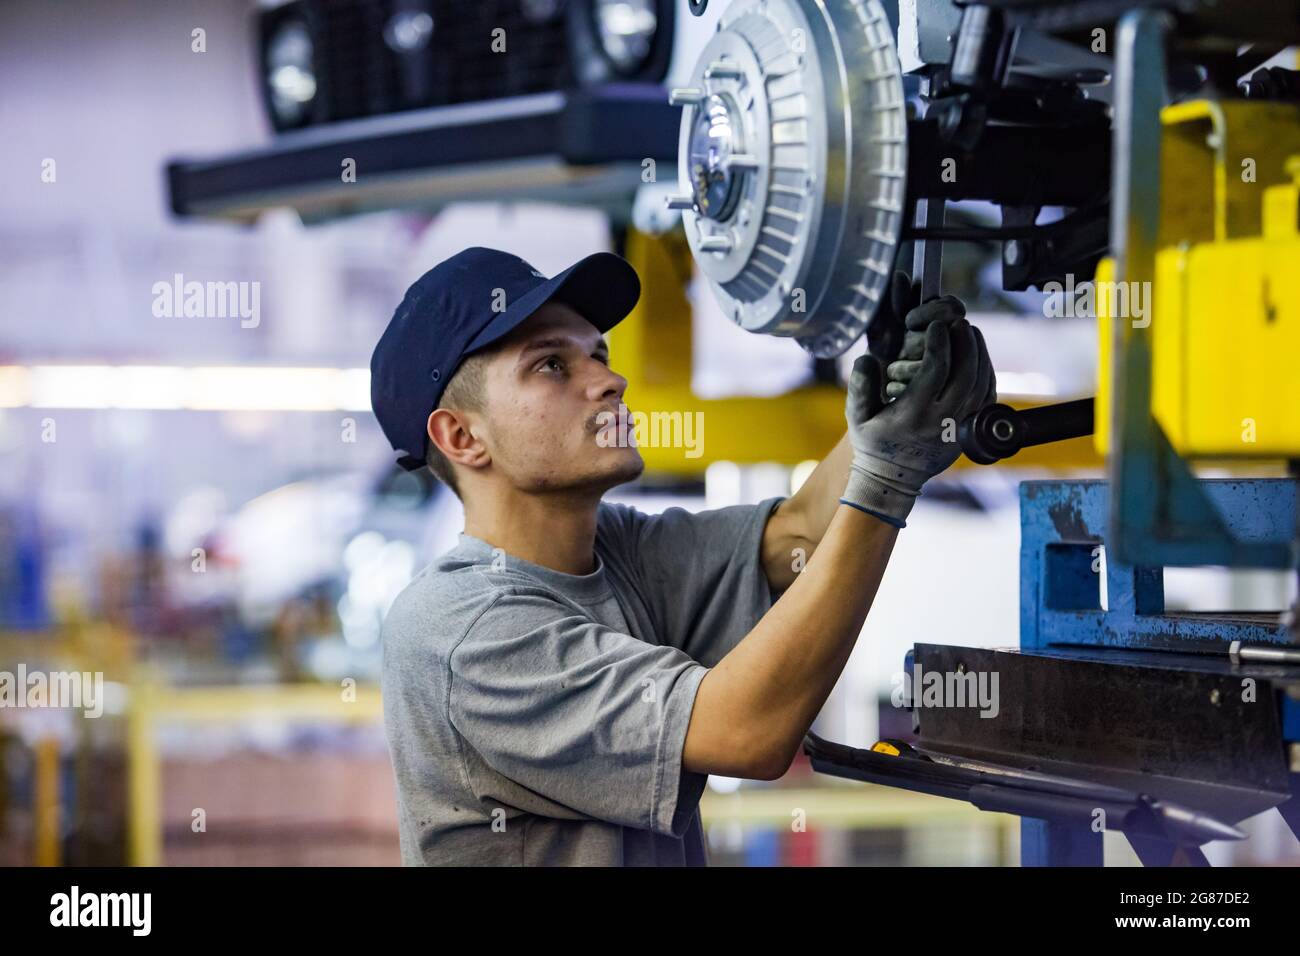 Ust'-Kamenogorsk, Kazakhstan - May 31,2012: Asia-Auto company auto-building plant. Young caucasian worker assembling car suspension and wheel hub. Stock Photo